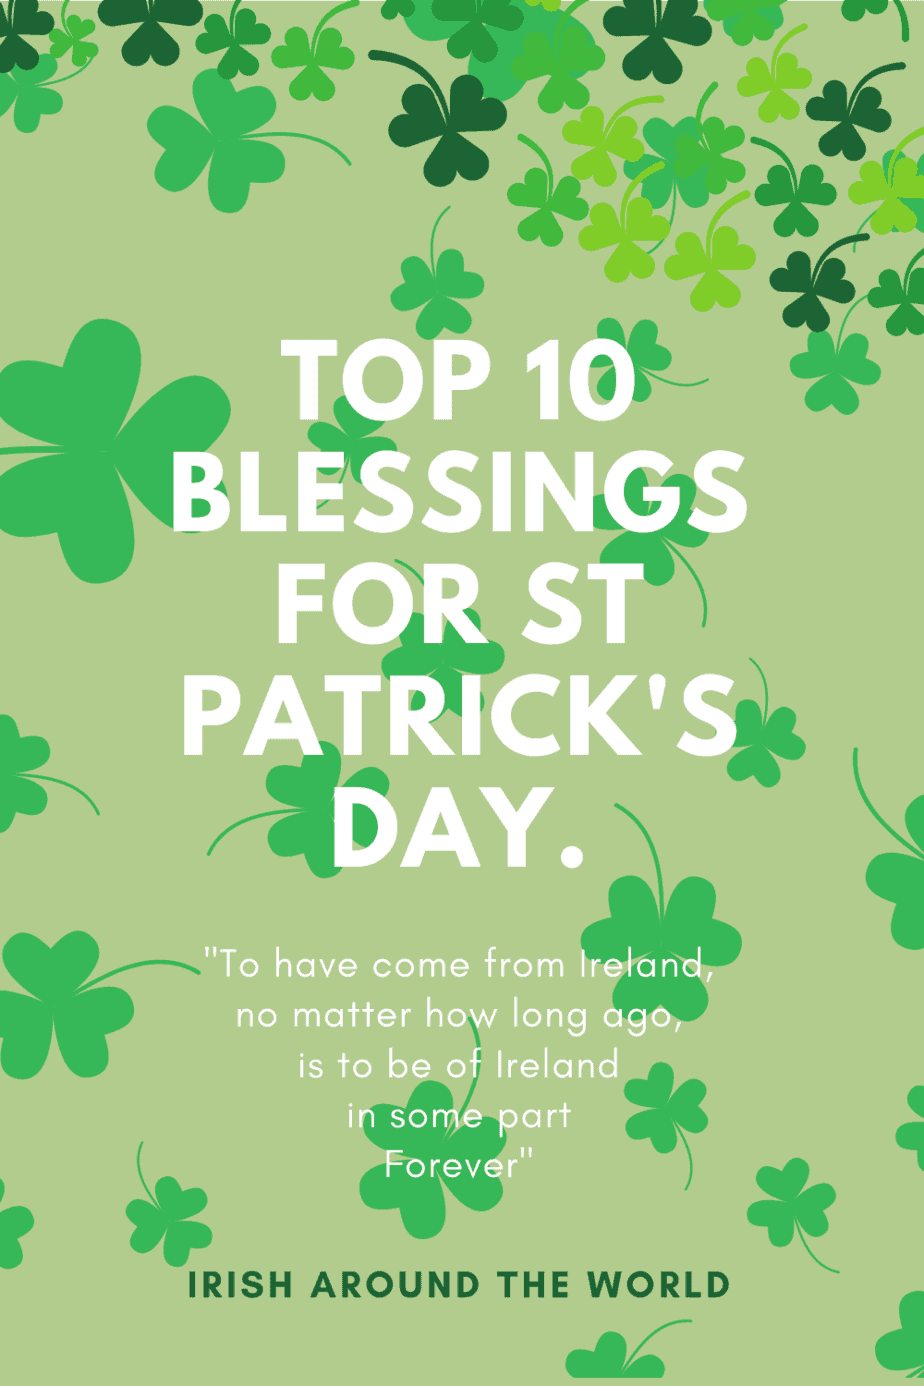 Top 10 Blessings for St Patrick's day